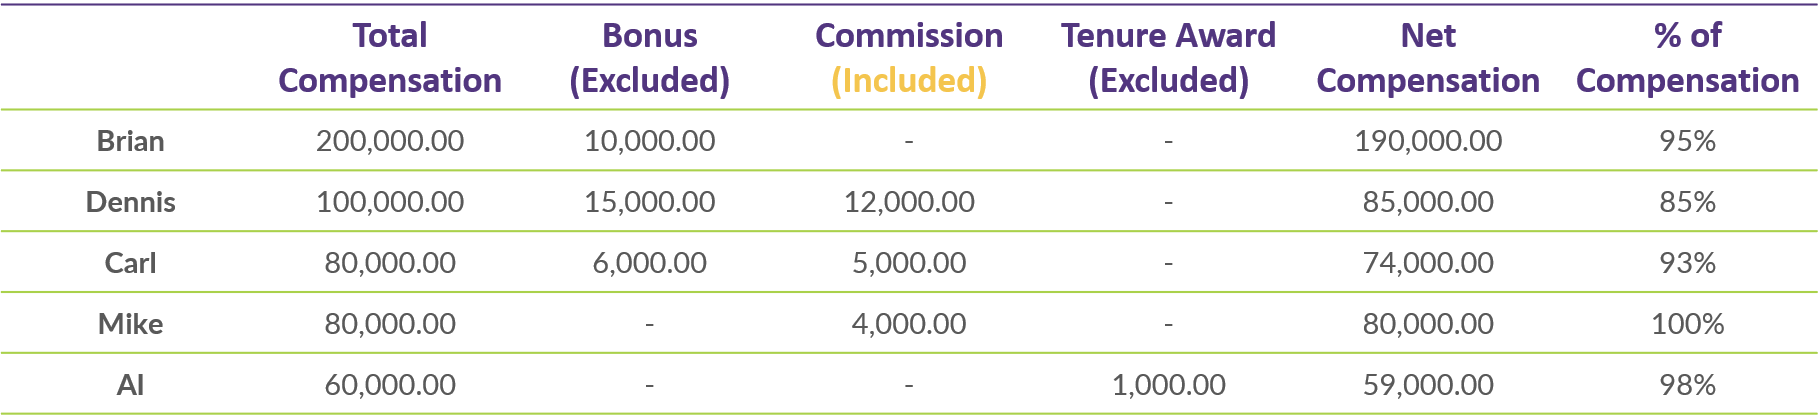 Q3 2020 COTQ_Table 3_2019 Including Commission